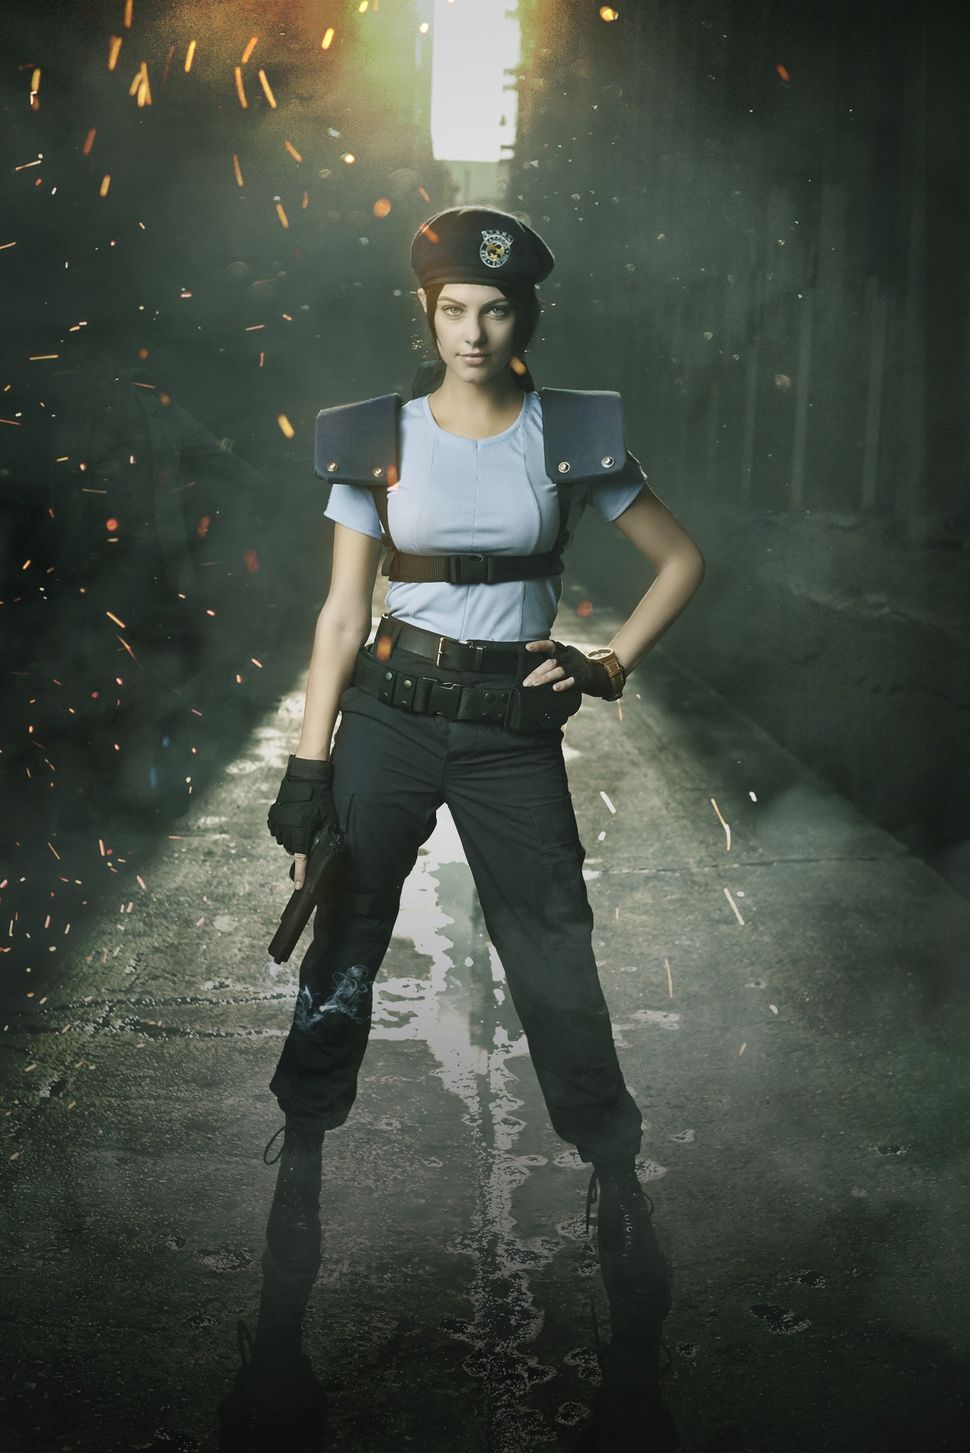 Is This Jill Valentine Cosplay Still Cosplay If Its Her Actual Model 